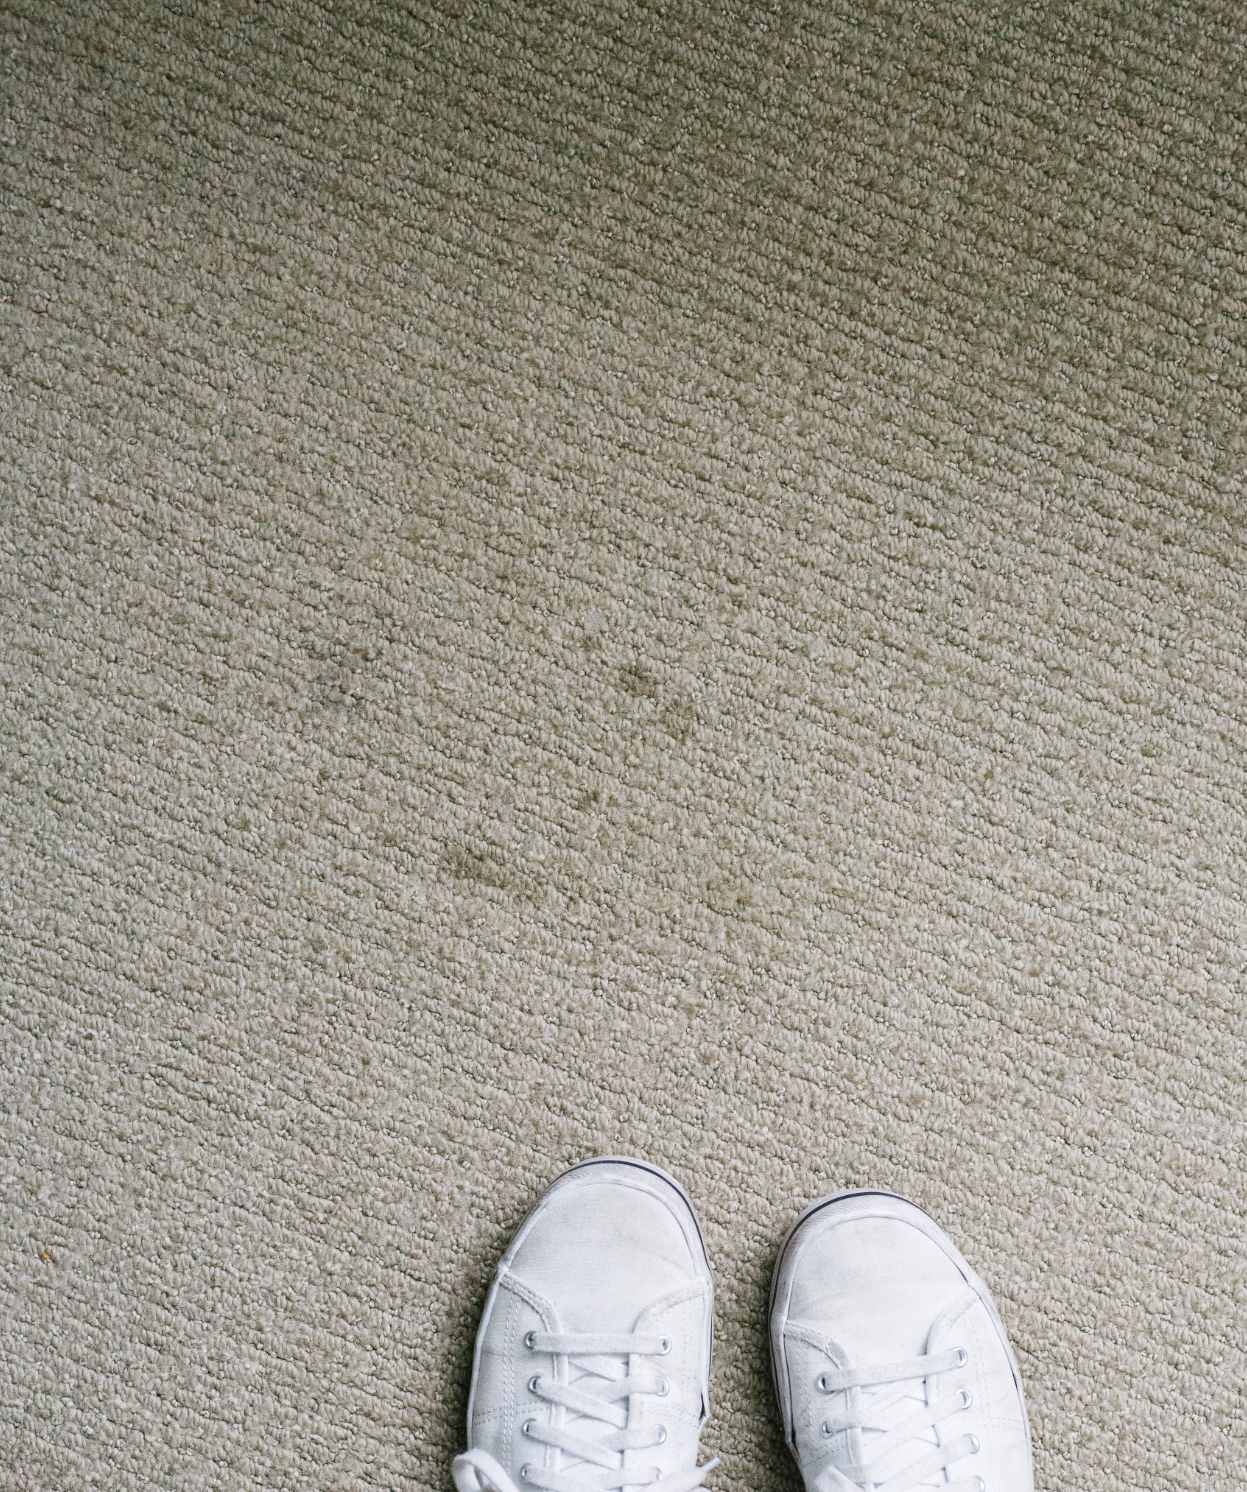 Pair of white shoes on a tan carpet with what wicking carpet stains look like on it